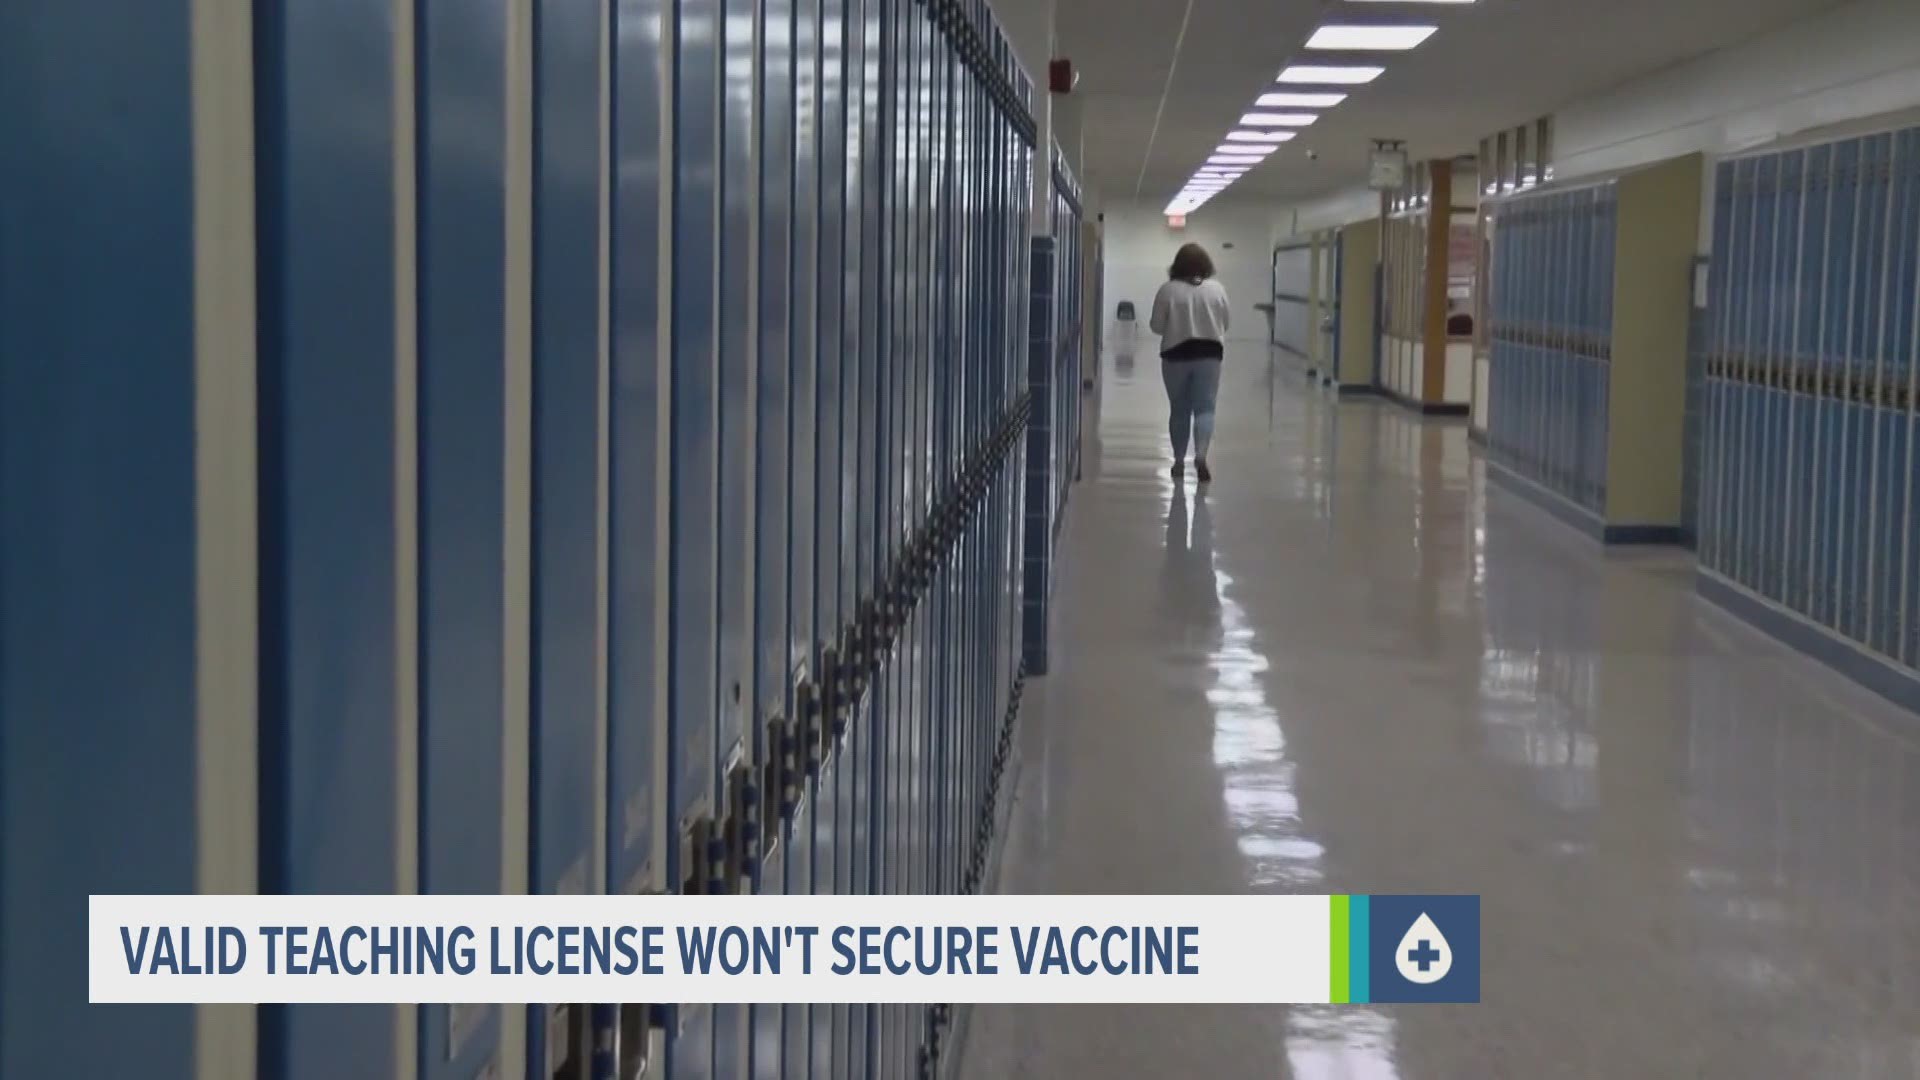 Teachers will need to bring proof of current employment to get vaccinated in Polk County.